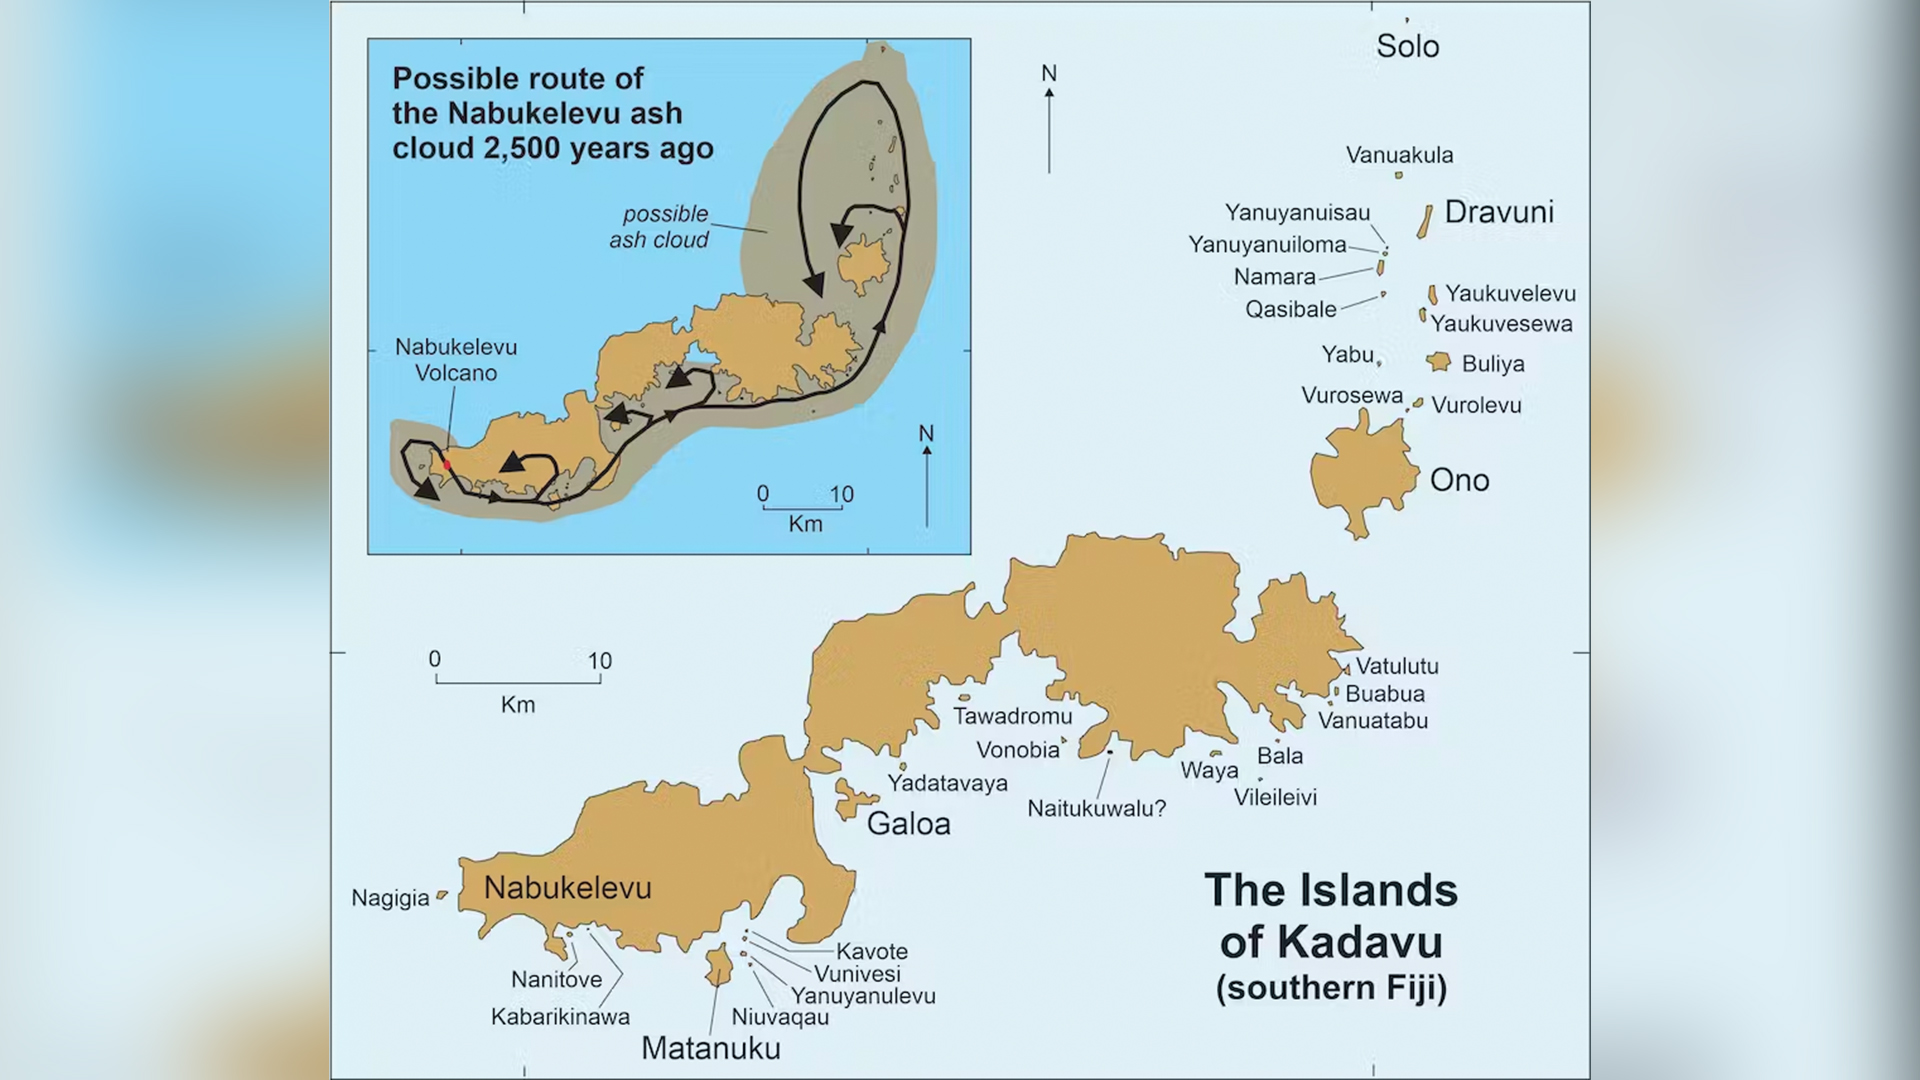 Smaller offshore islands named in seven versions of the Nabukelevu story as having formed following the Nabukelevu eruption. Inset shows the possible trace of the ash cloud based on the stories.